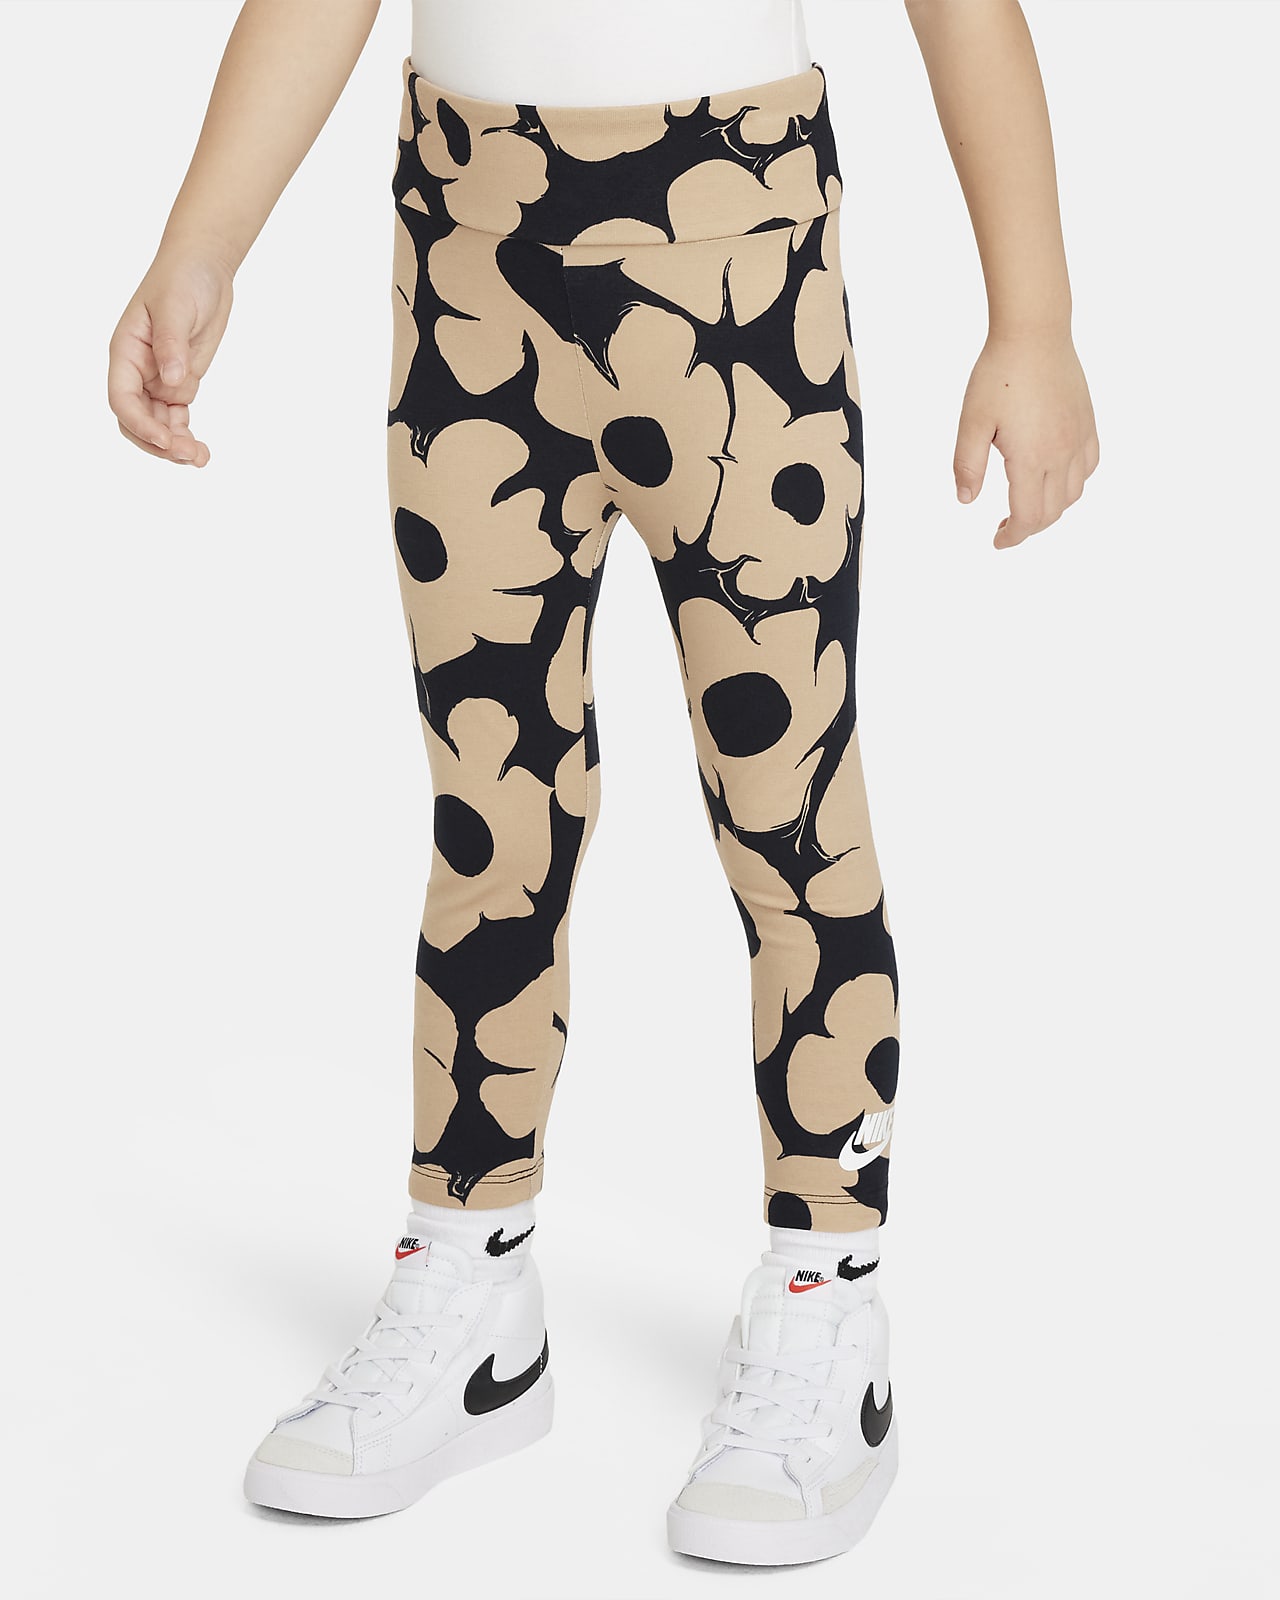 Nike NSW FLORAL FOAMPOSITE HIGH-WAISTED LEGGINGS – DTLR